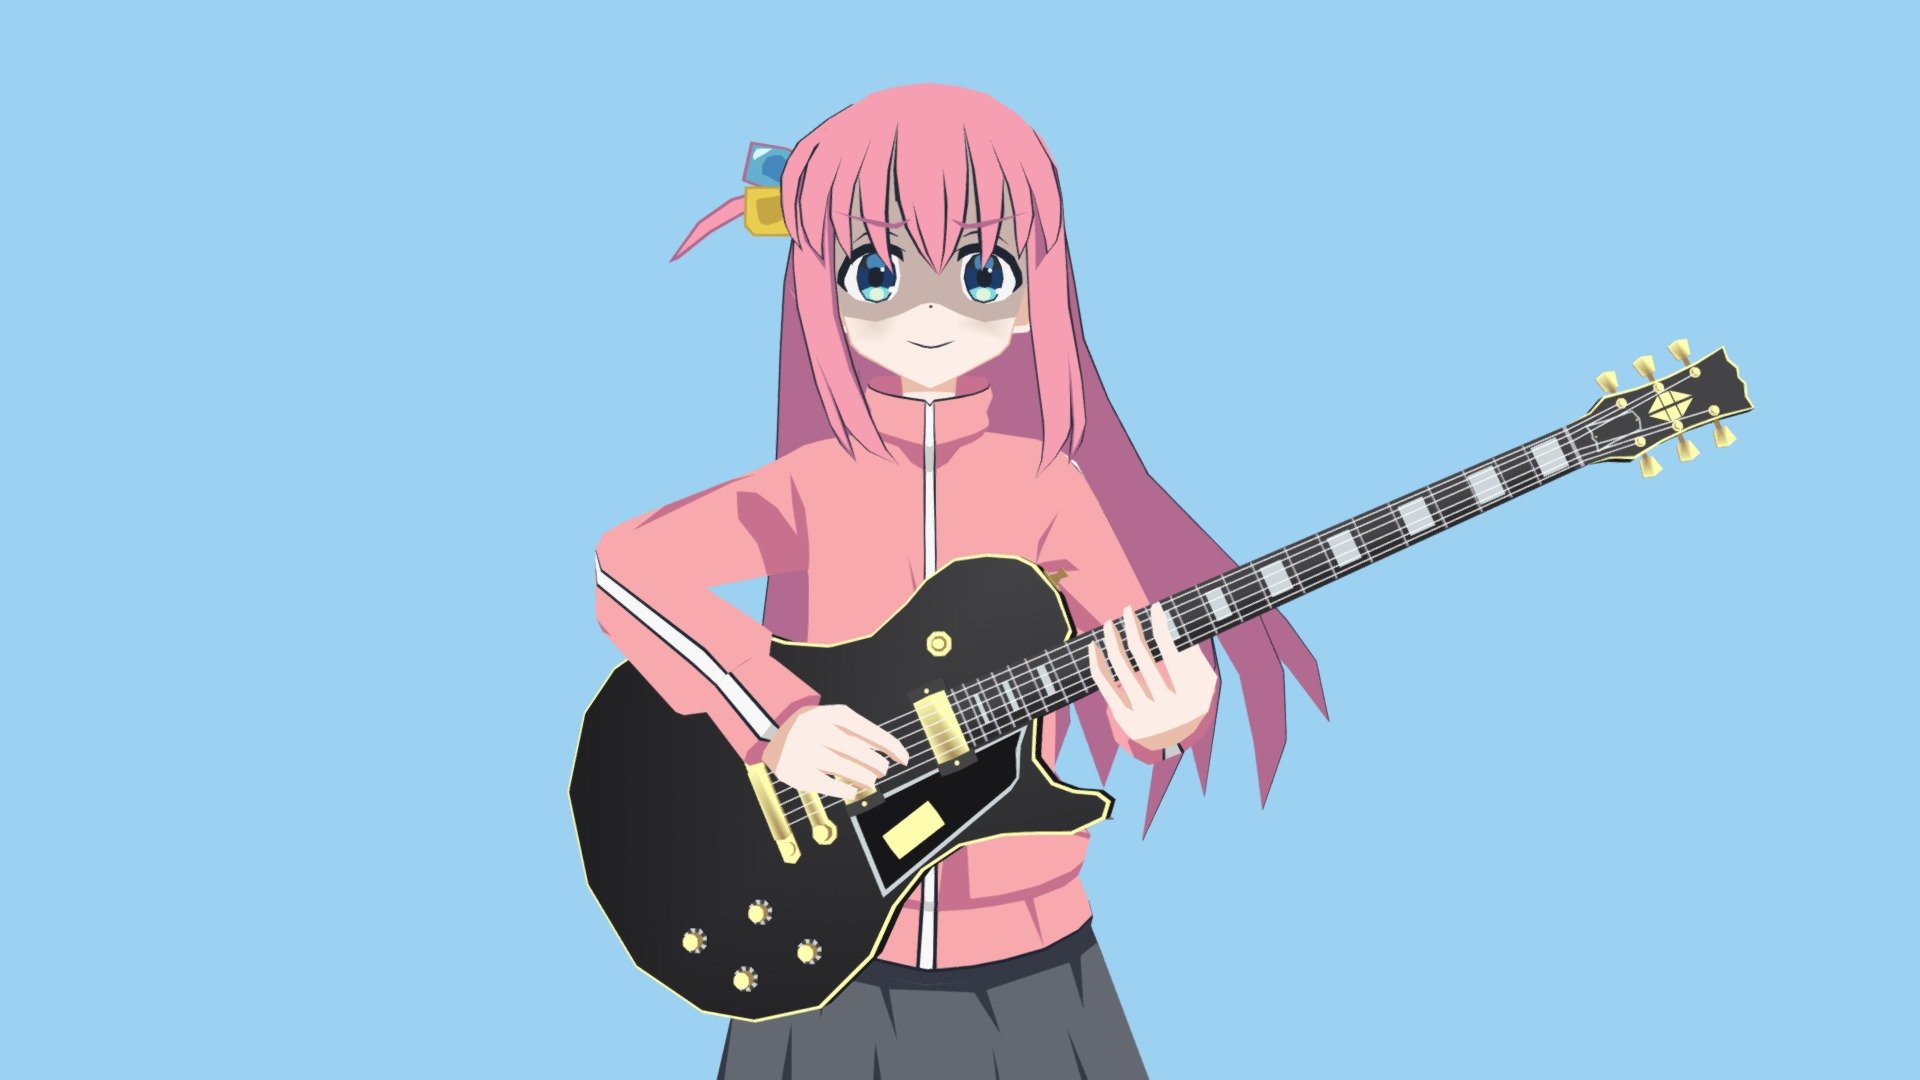 Do you like Bocchi the Rock? - Forums 